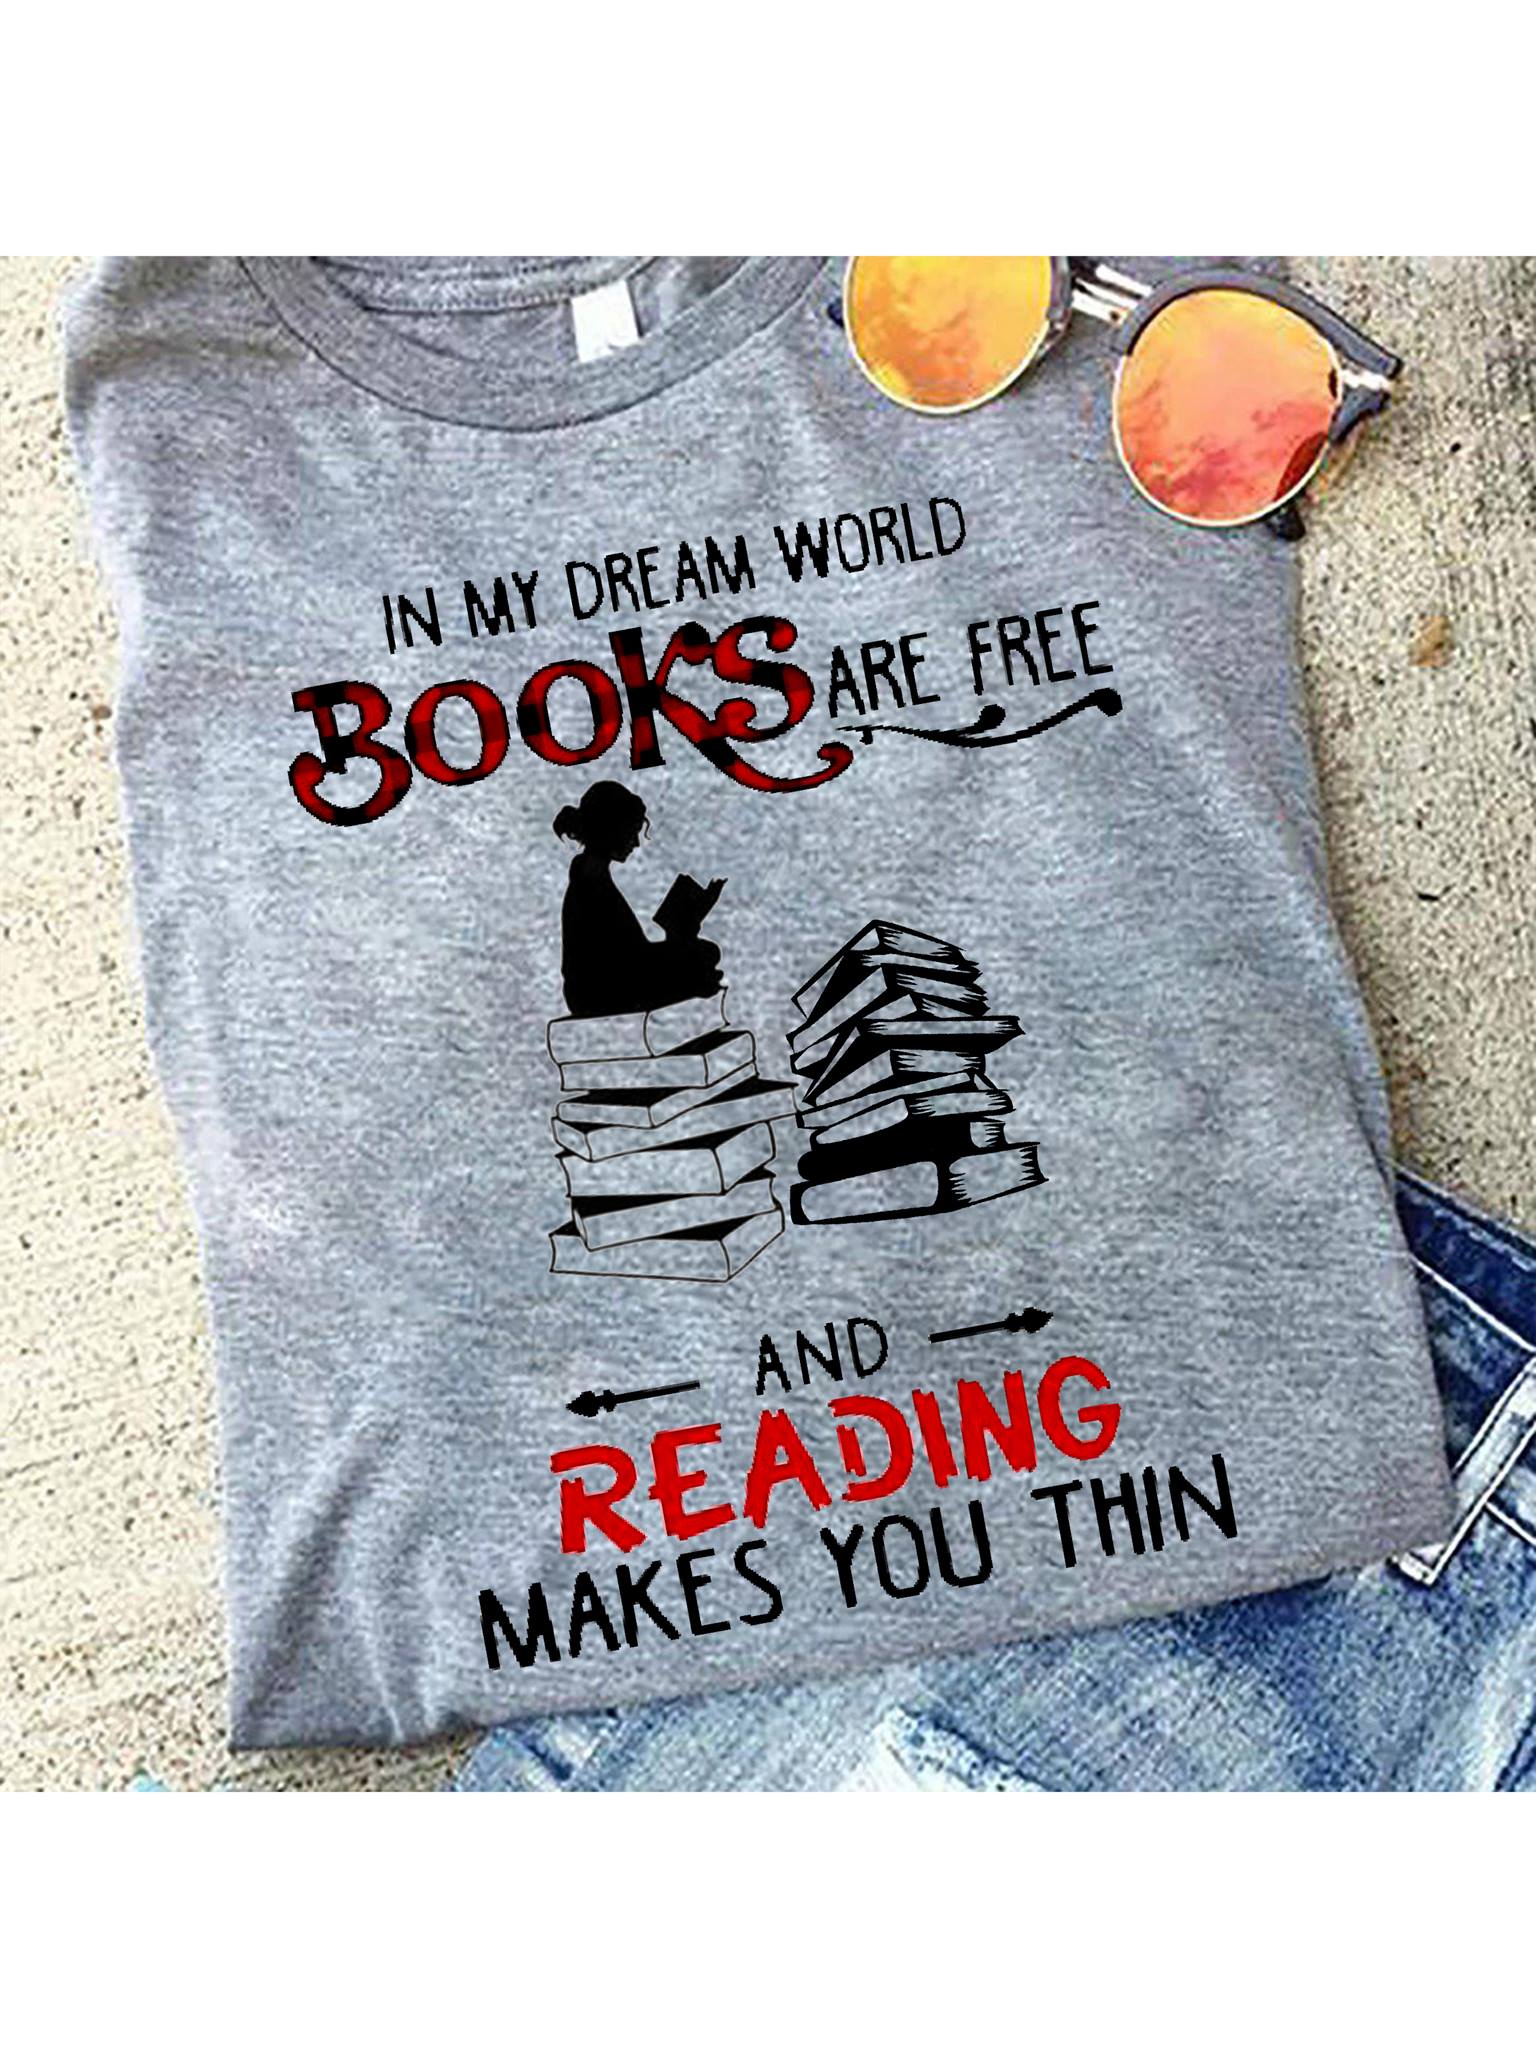 In my dream world, books are free and reading makes you thin